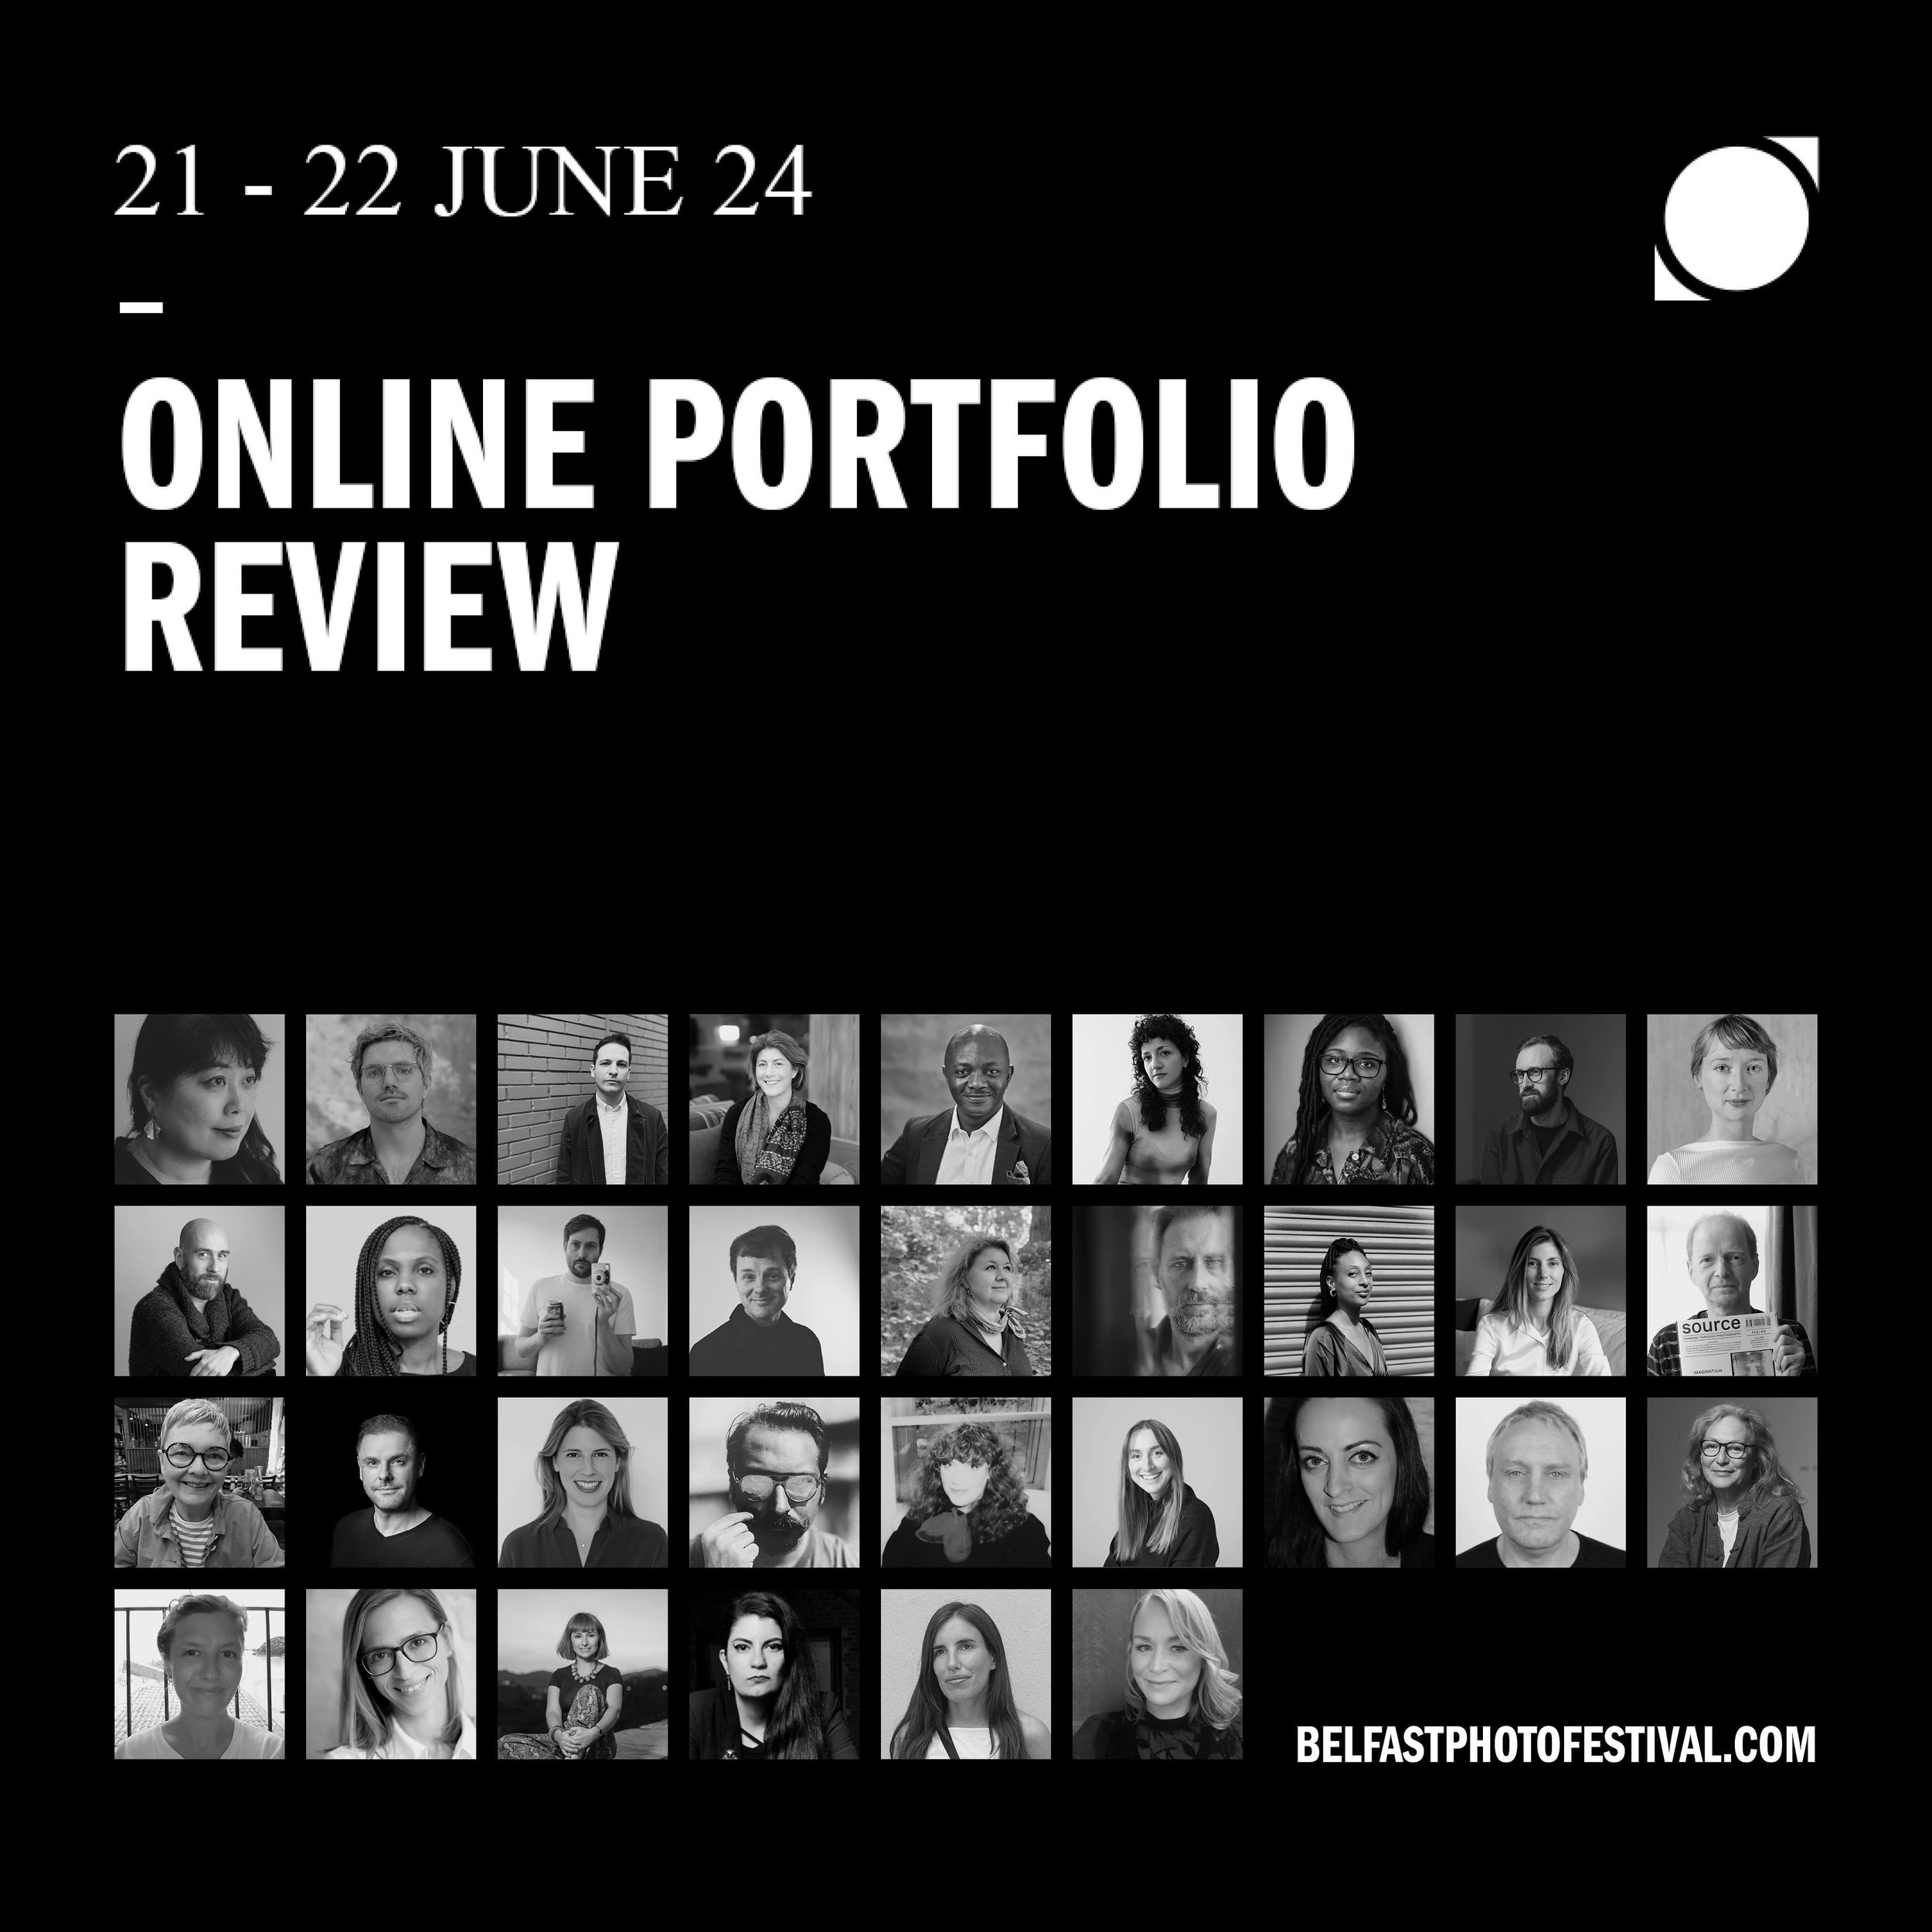 ONLINE PORTFOLIO REVIEWS - EARLY BIRD DISCOUNT NOW AVAILABLE! ➡️ 
Link in bio!

This is a great opportunity for photographers and artists to meet 1-1 with Irish, British and International experts.

REVIEWERS 👇

GWEN LEE - DECK &amp; Singapore Int. P